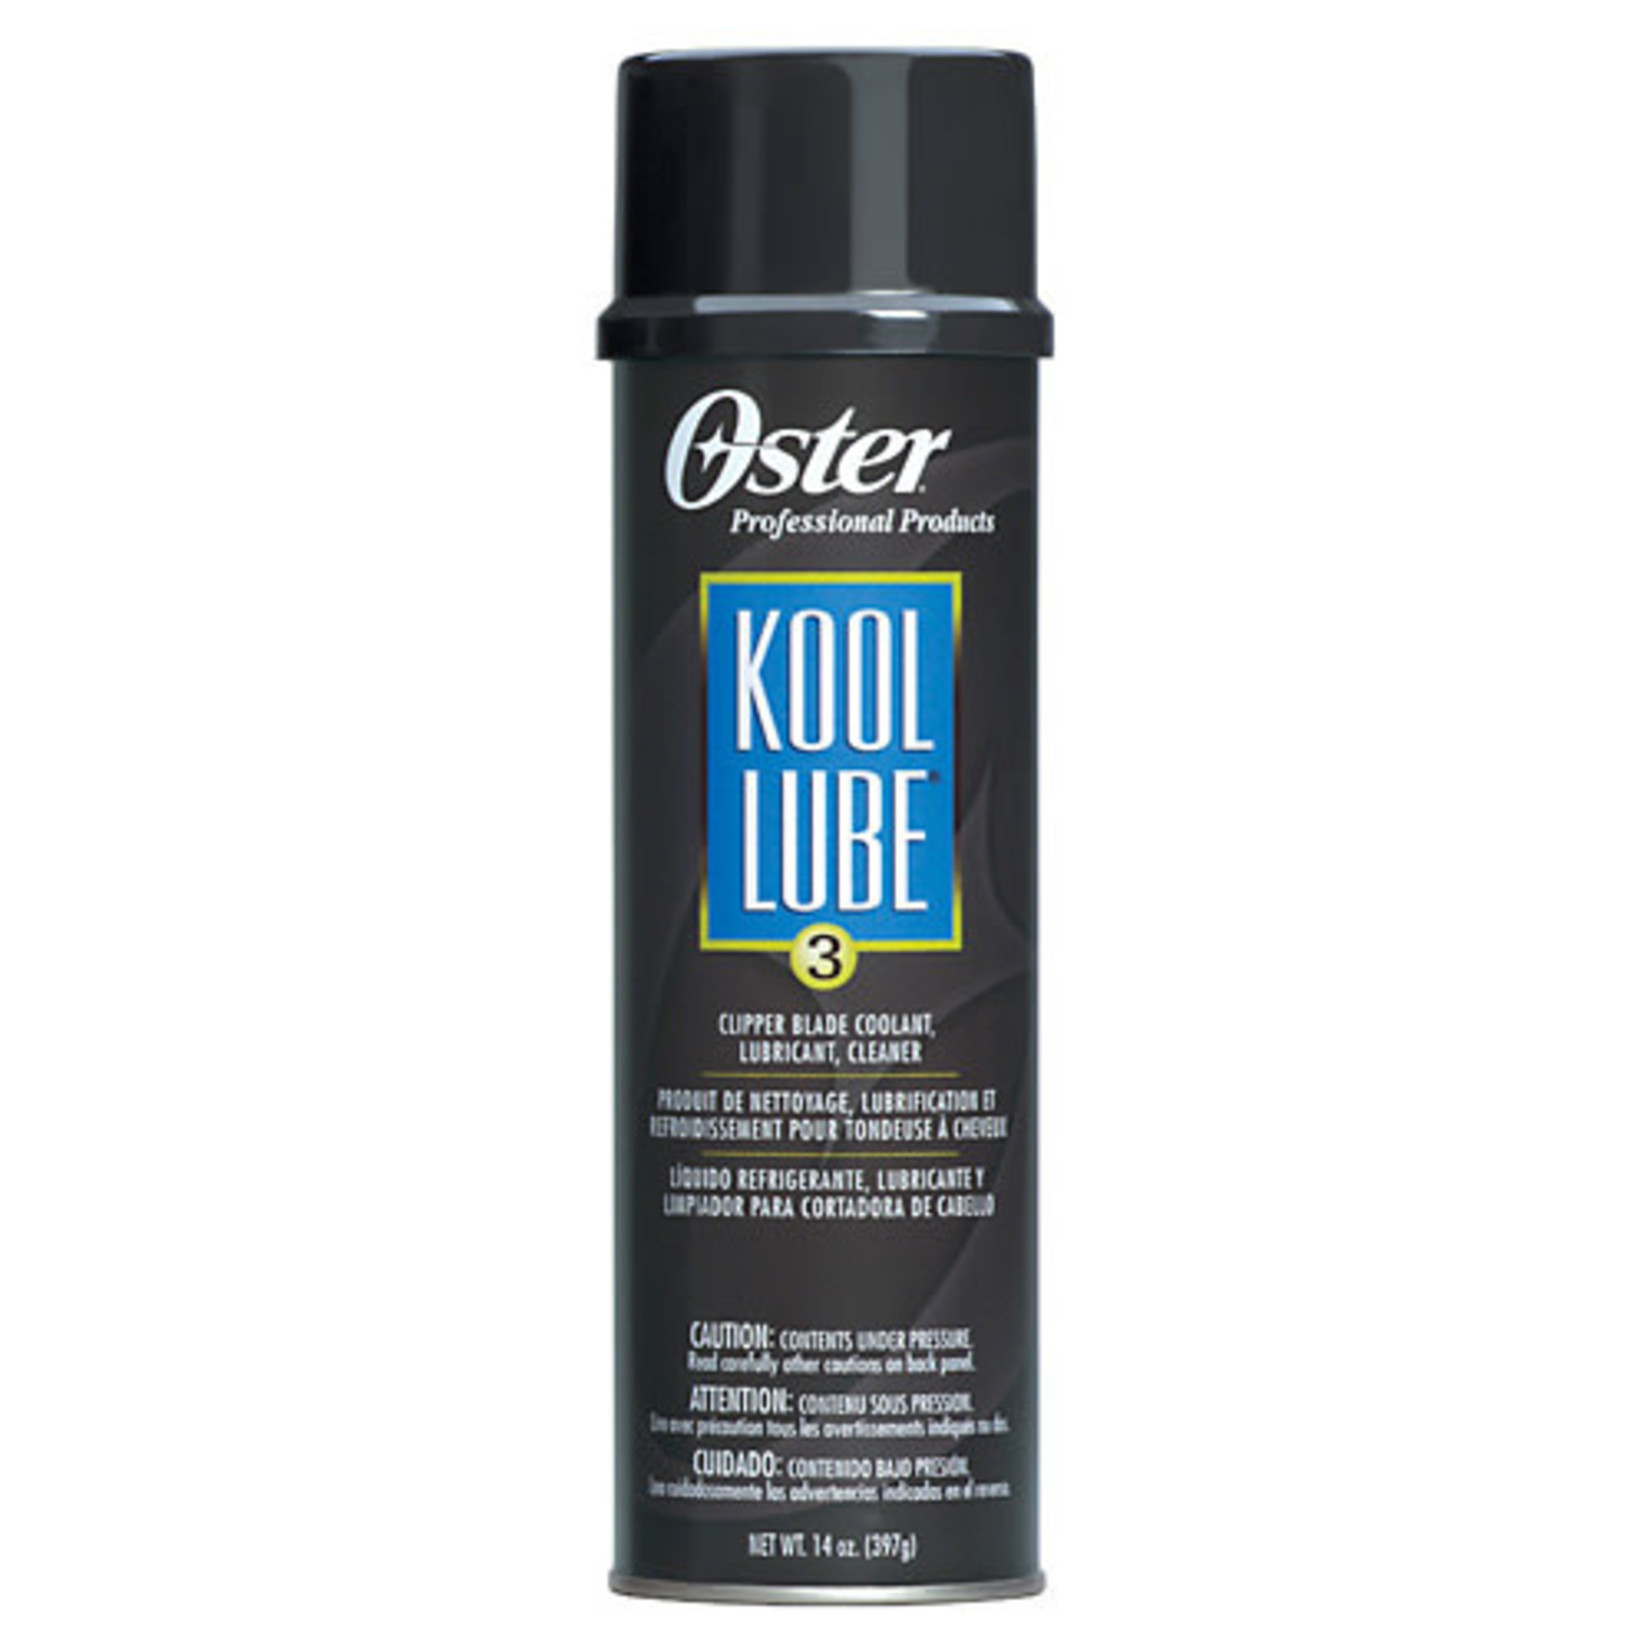 Oster Oster Kool Lube 14oz